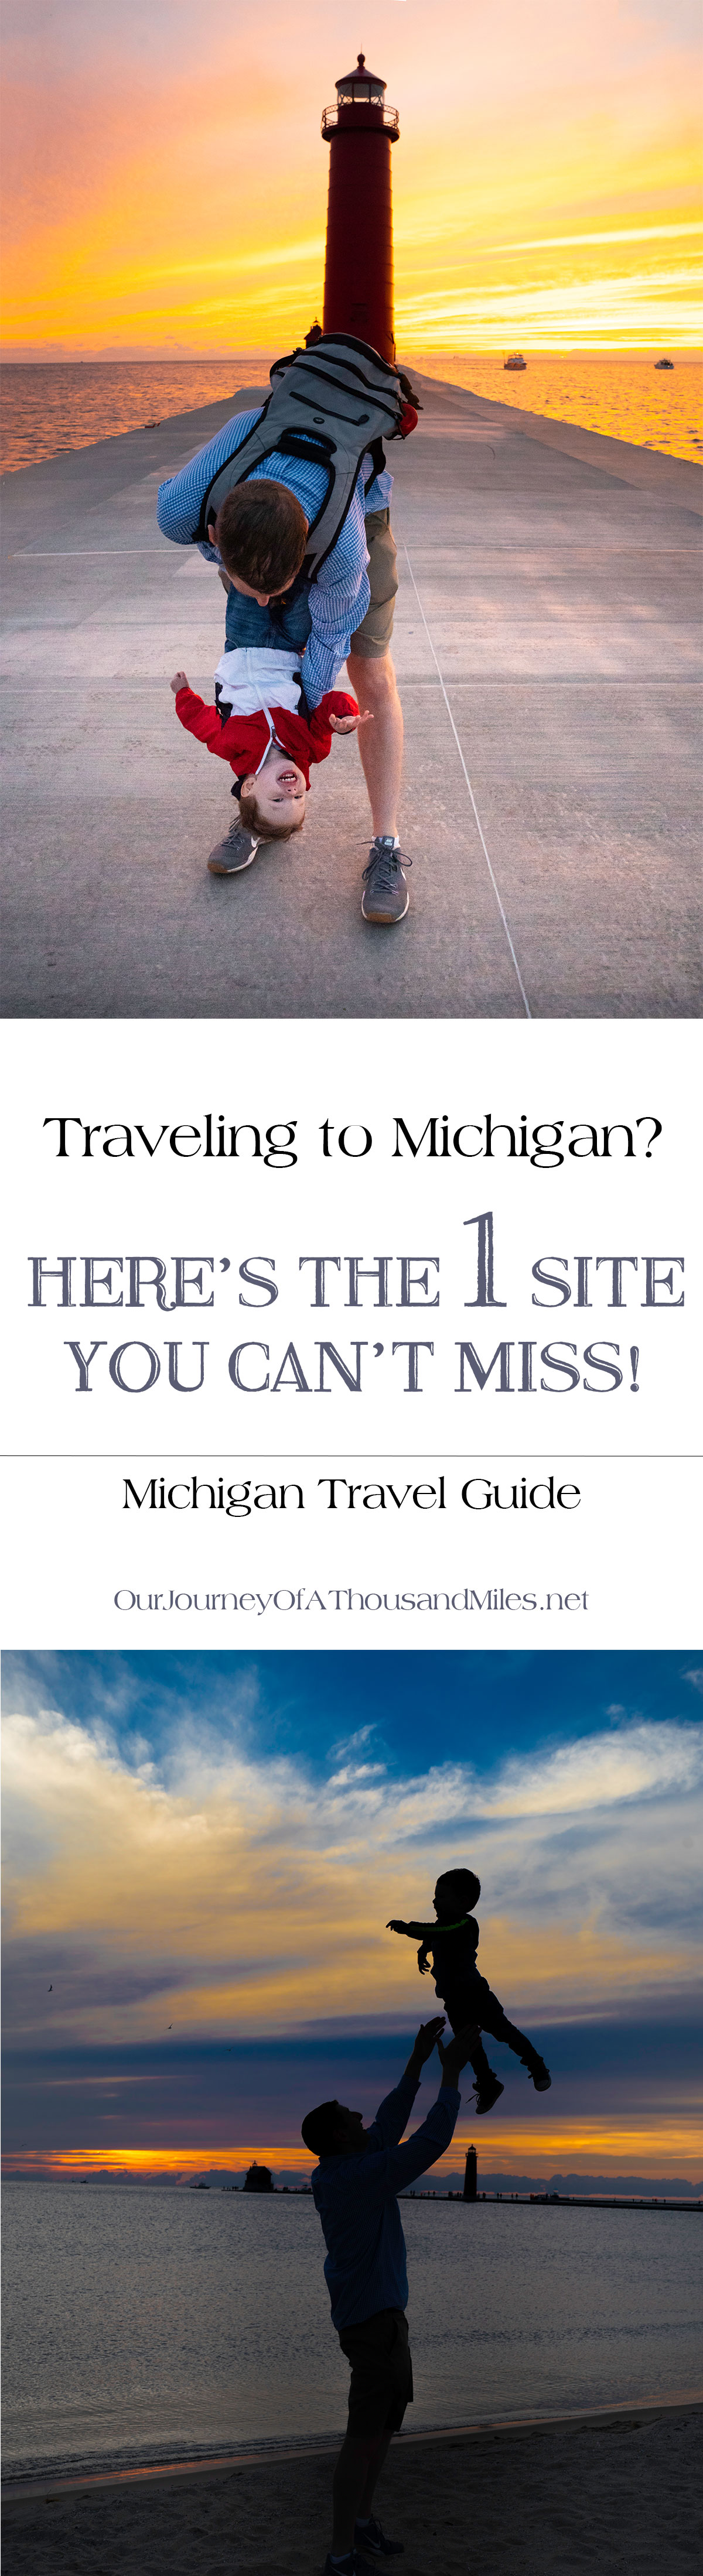 The-One-Site-You-Cannot-Miss-On-Your-Travels-to-Michigan